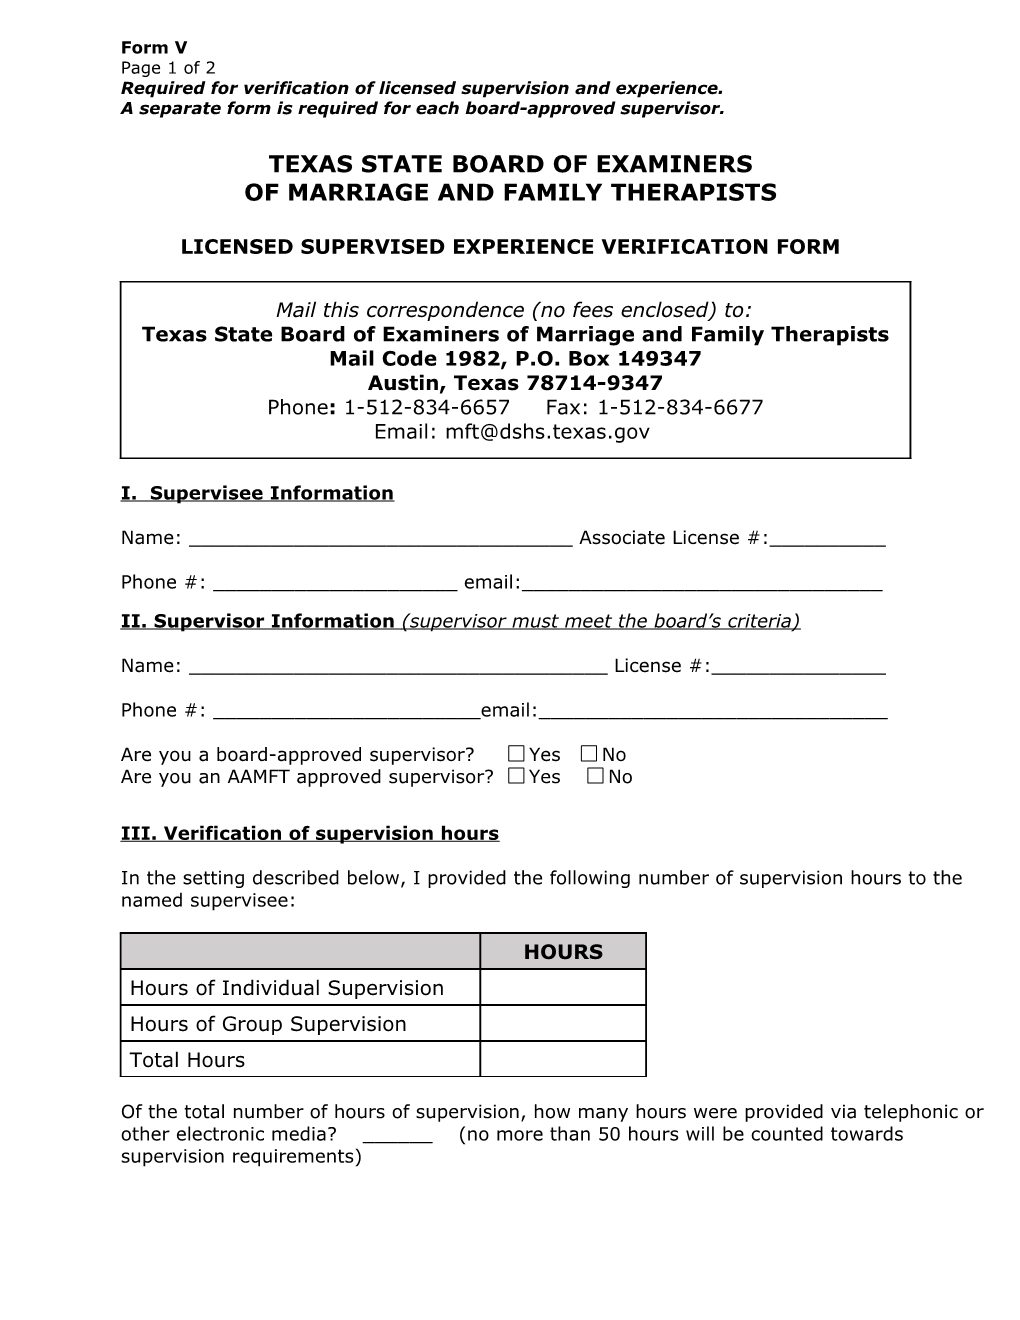 Licensed Supervised Experience Verification Form